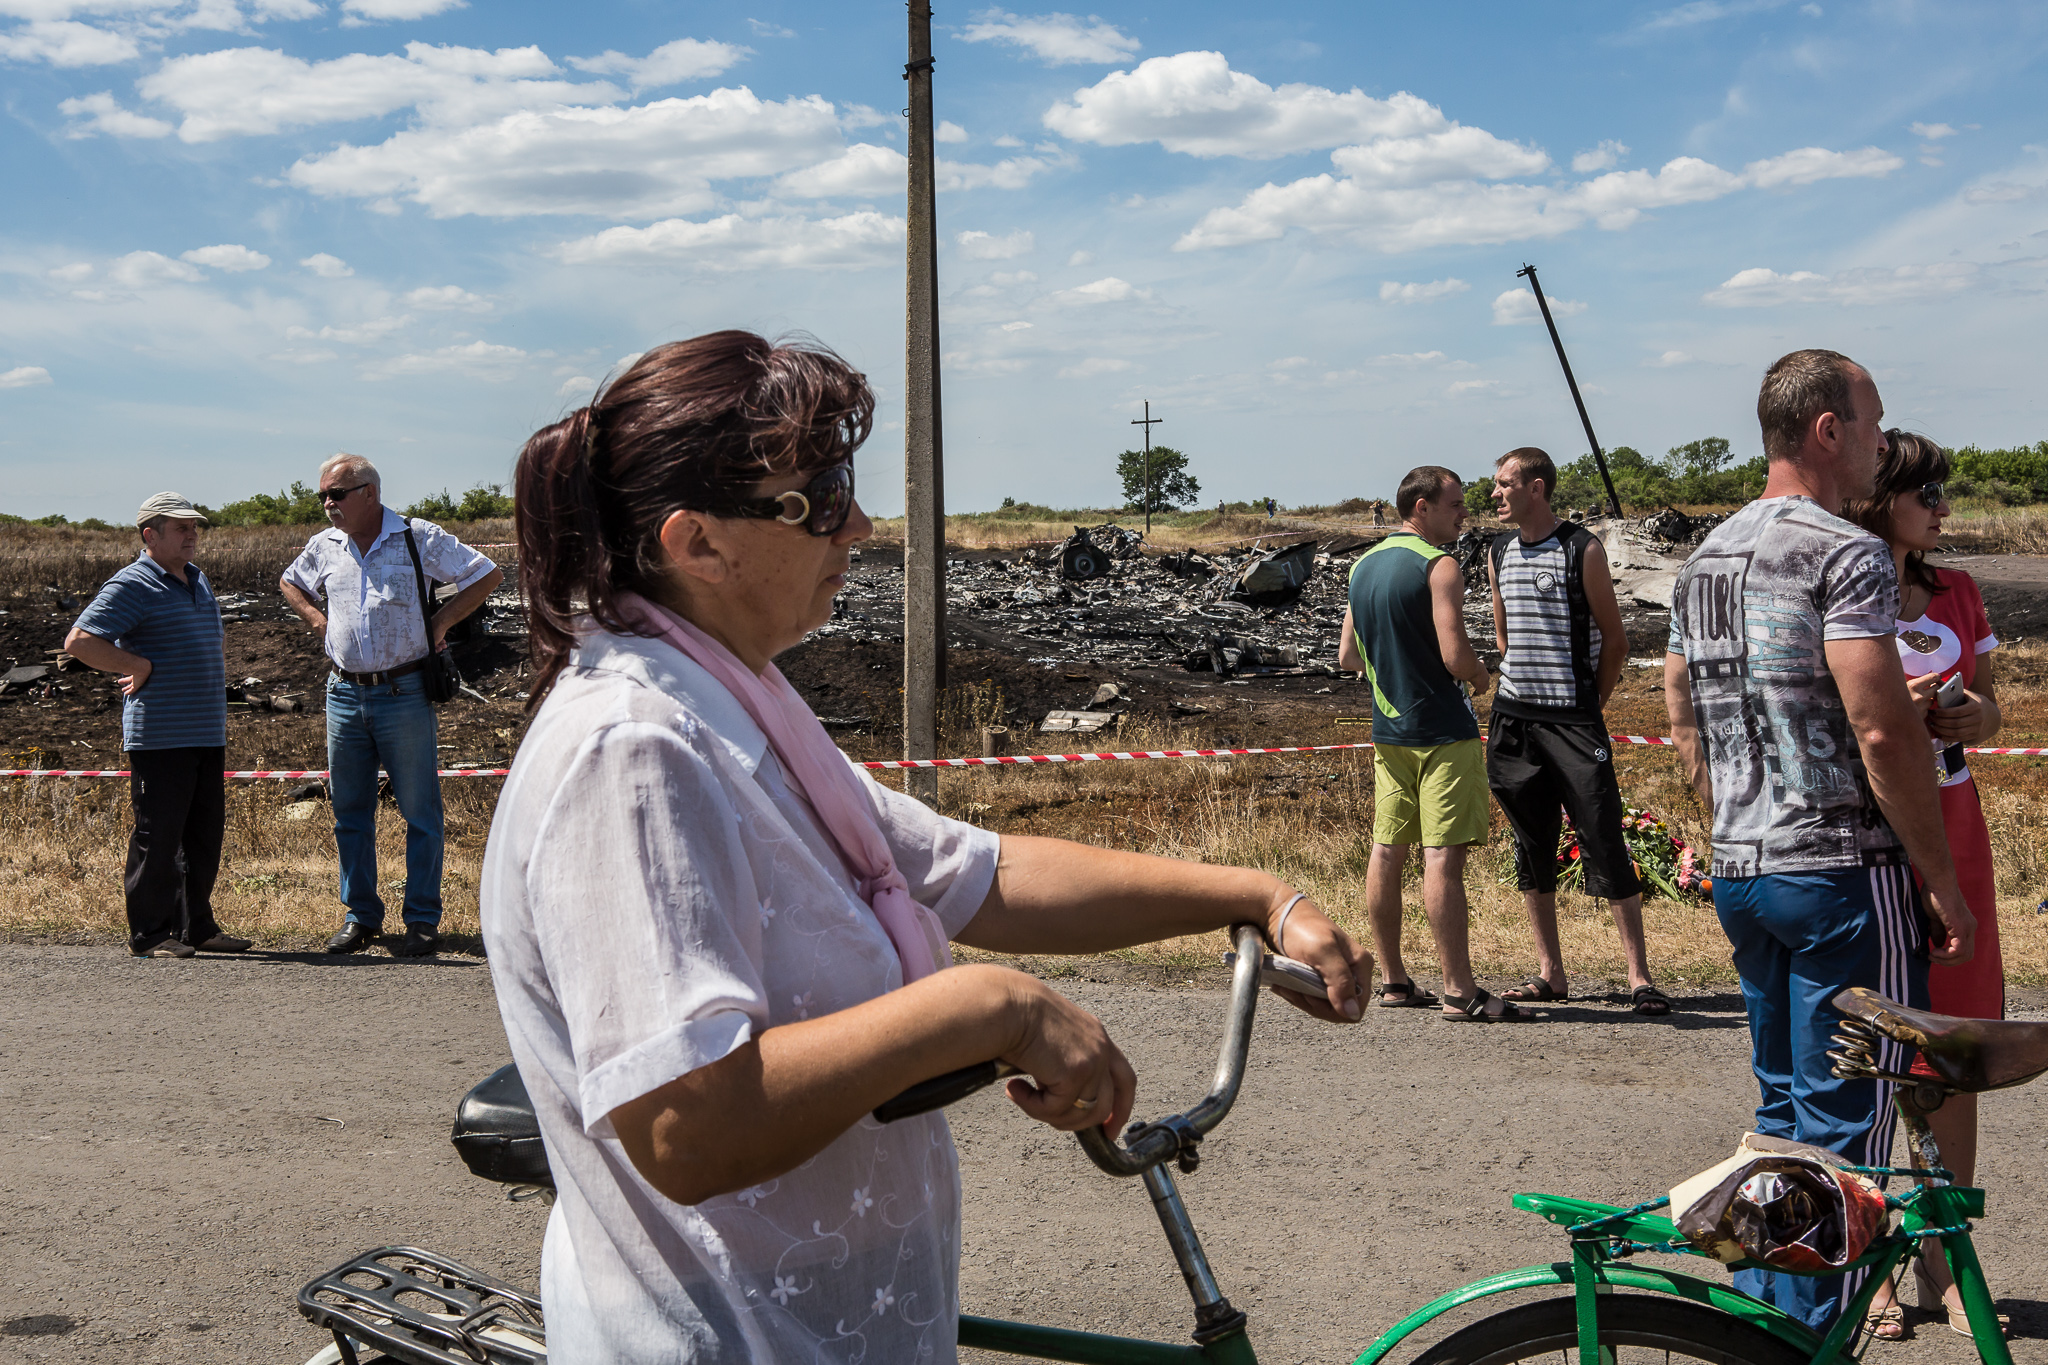  Local residents gather to watch as the bodies of victims of Malaysia Airlines flight MH17 are removed from the scene of the crash on July 21, 2014 in Grabovo, Ukraine. Malaysia Airlines flight MH17 was travelling from Amsterdam to Kuala Lumpur when 